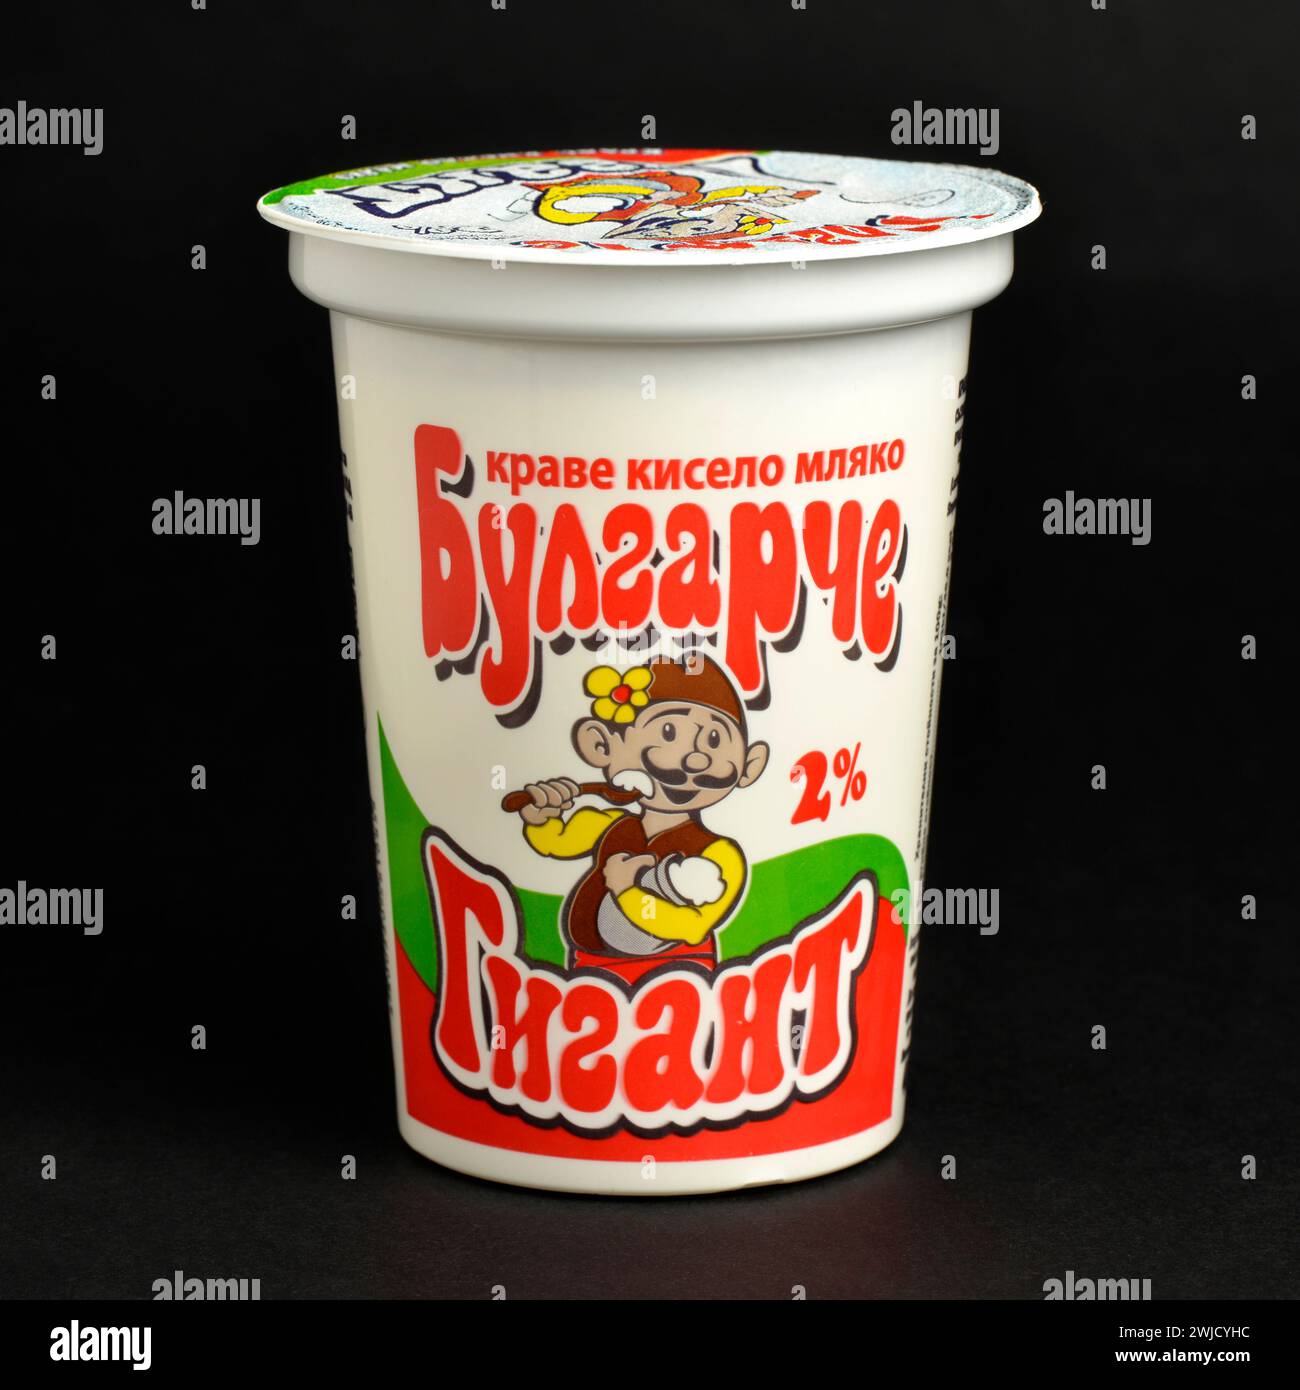 Typical Bulgarian 2% low fat plain yogurt packaging with folk motif and Cyrillic text on black Stock Photo